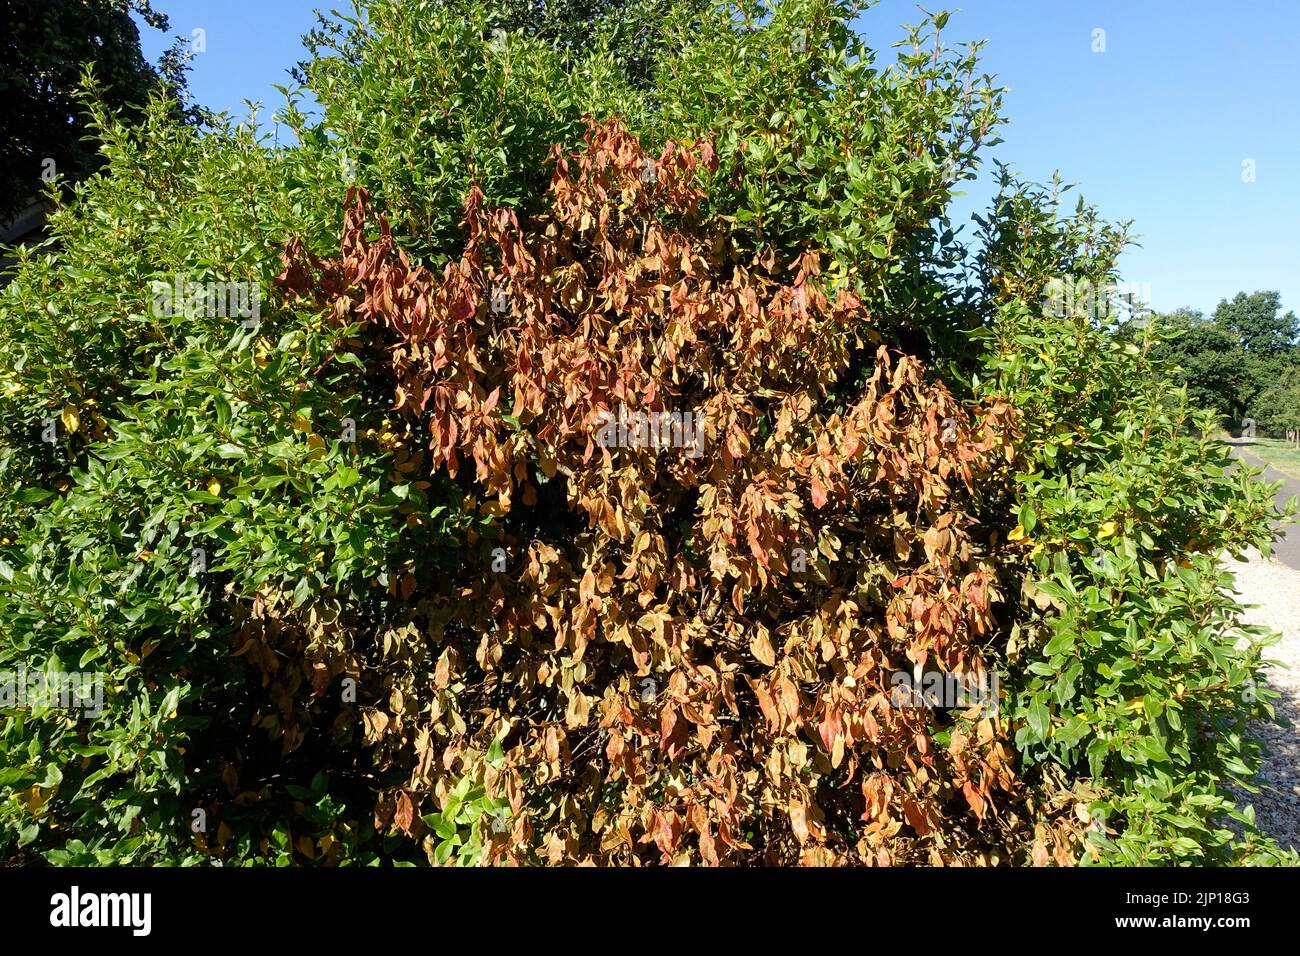 Large portion of shrub dying of water shortage in August 2022 drought Cotswolds UK Stock Photo